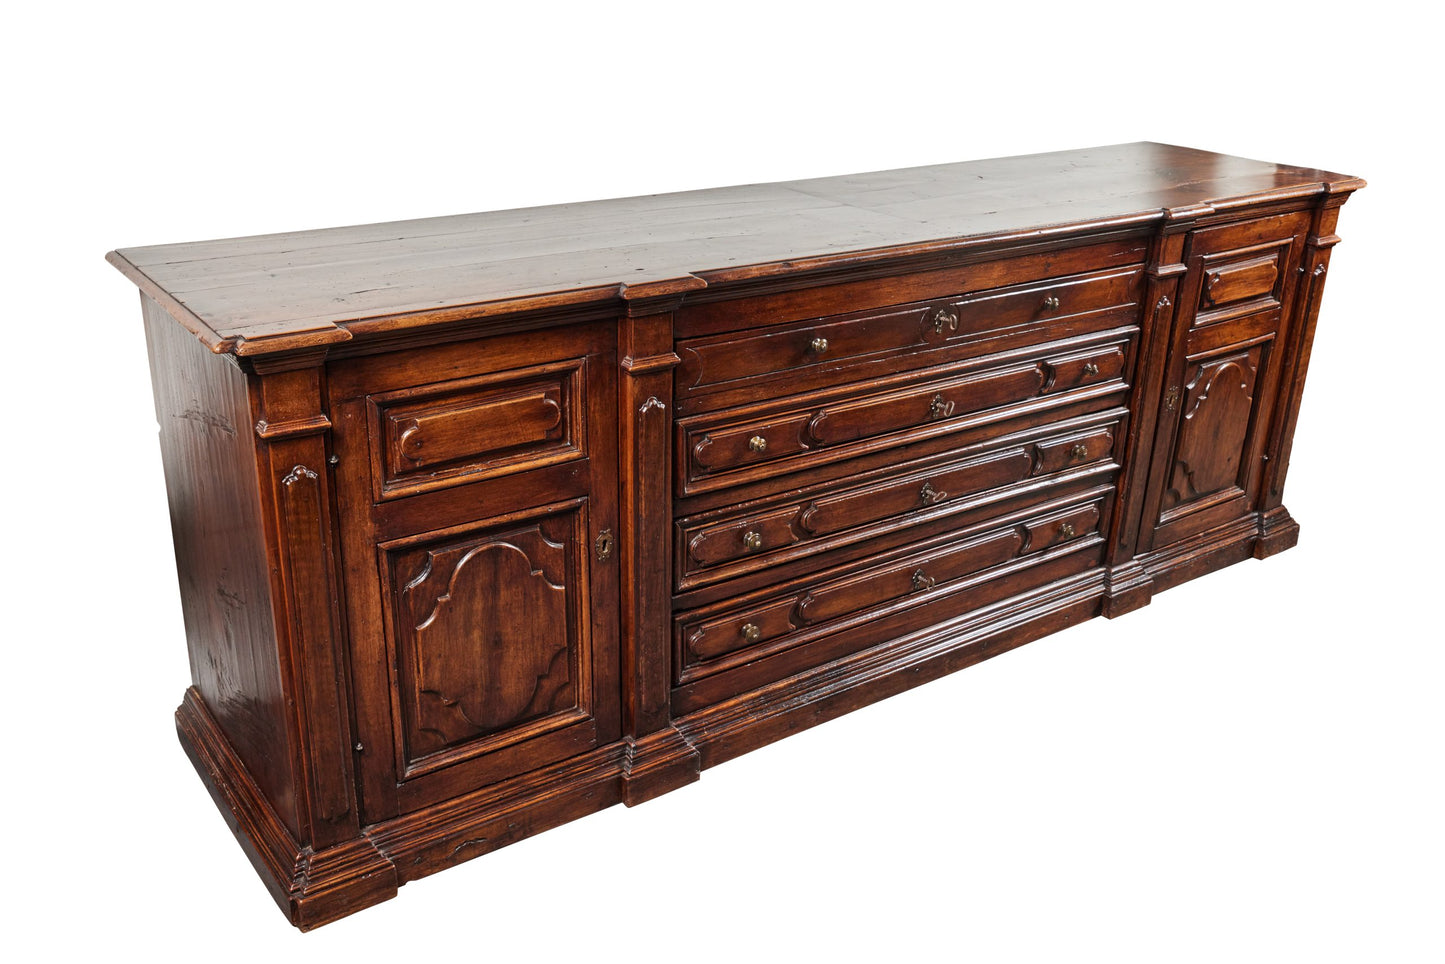 Large, 19th Century, Neoclassical Credenza